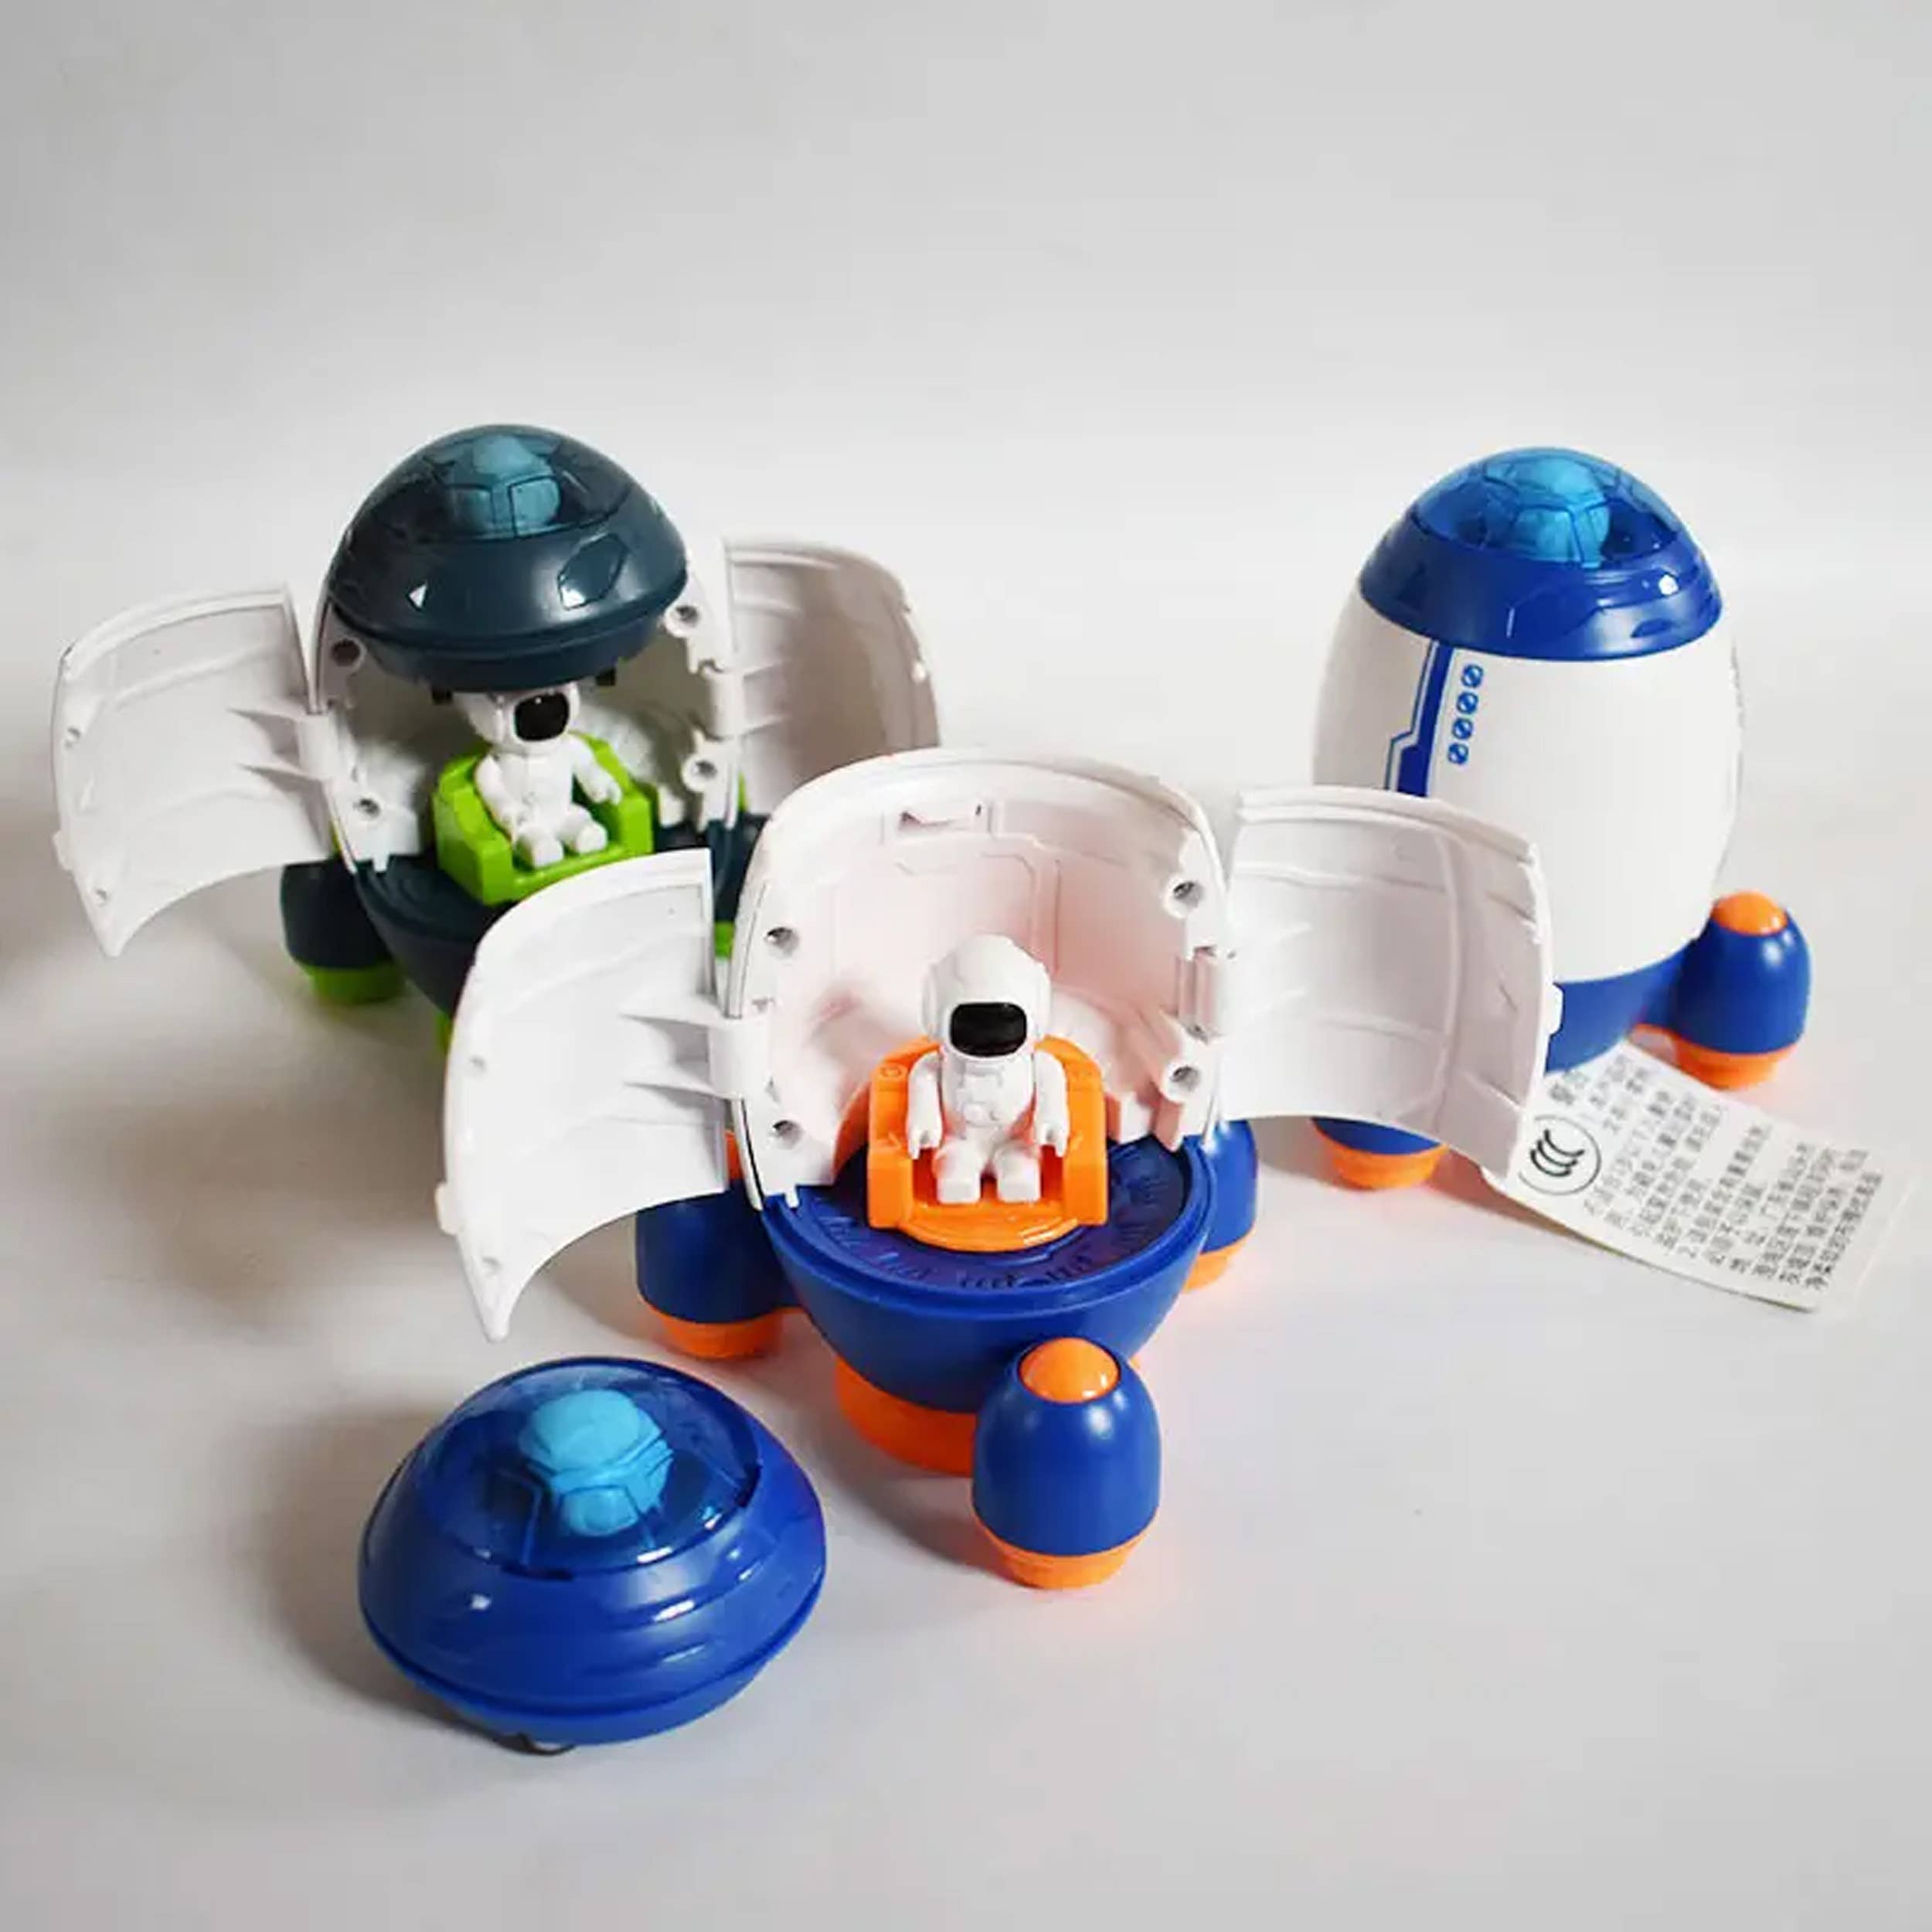 Astronaut Rocket Space Toy